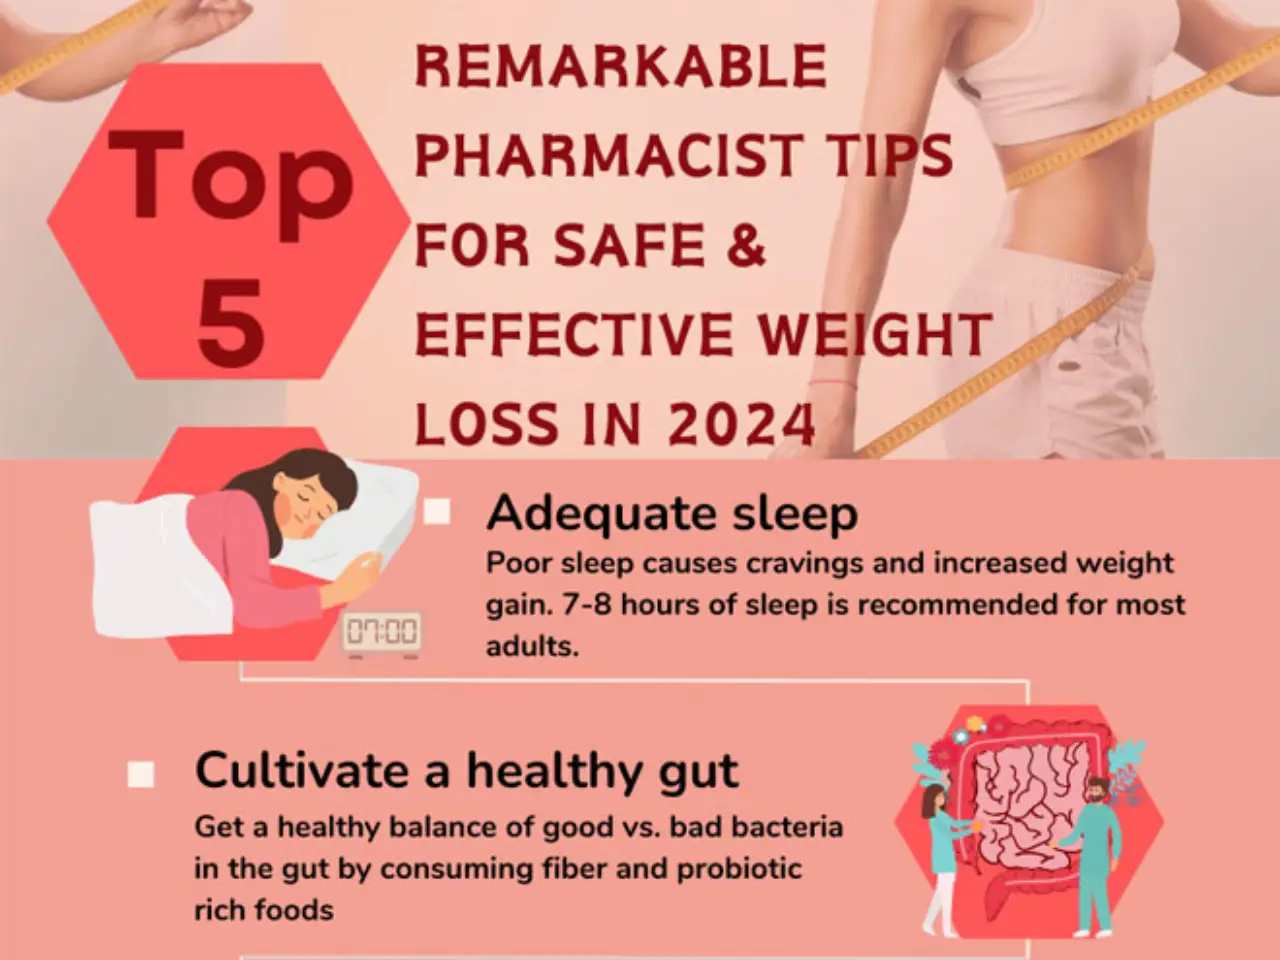 Top Five Remarkable Pharmacist Tips for Safe & Effective Weight Loss